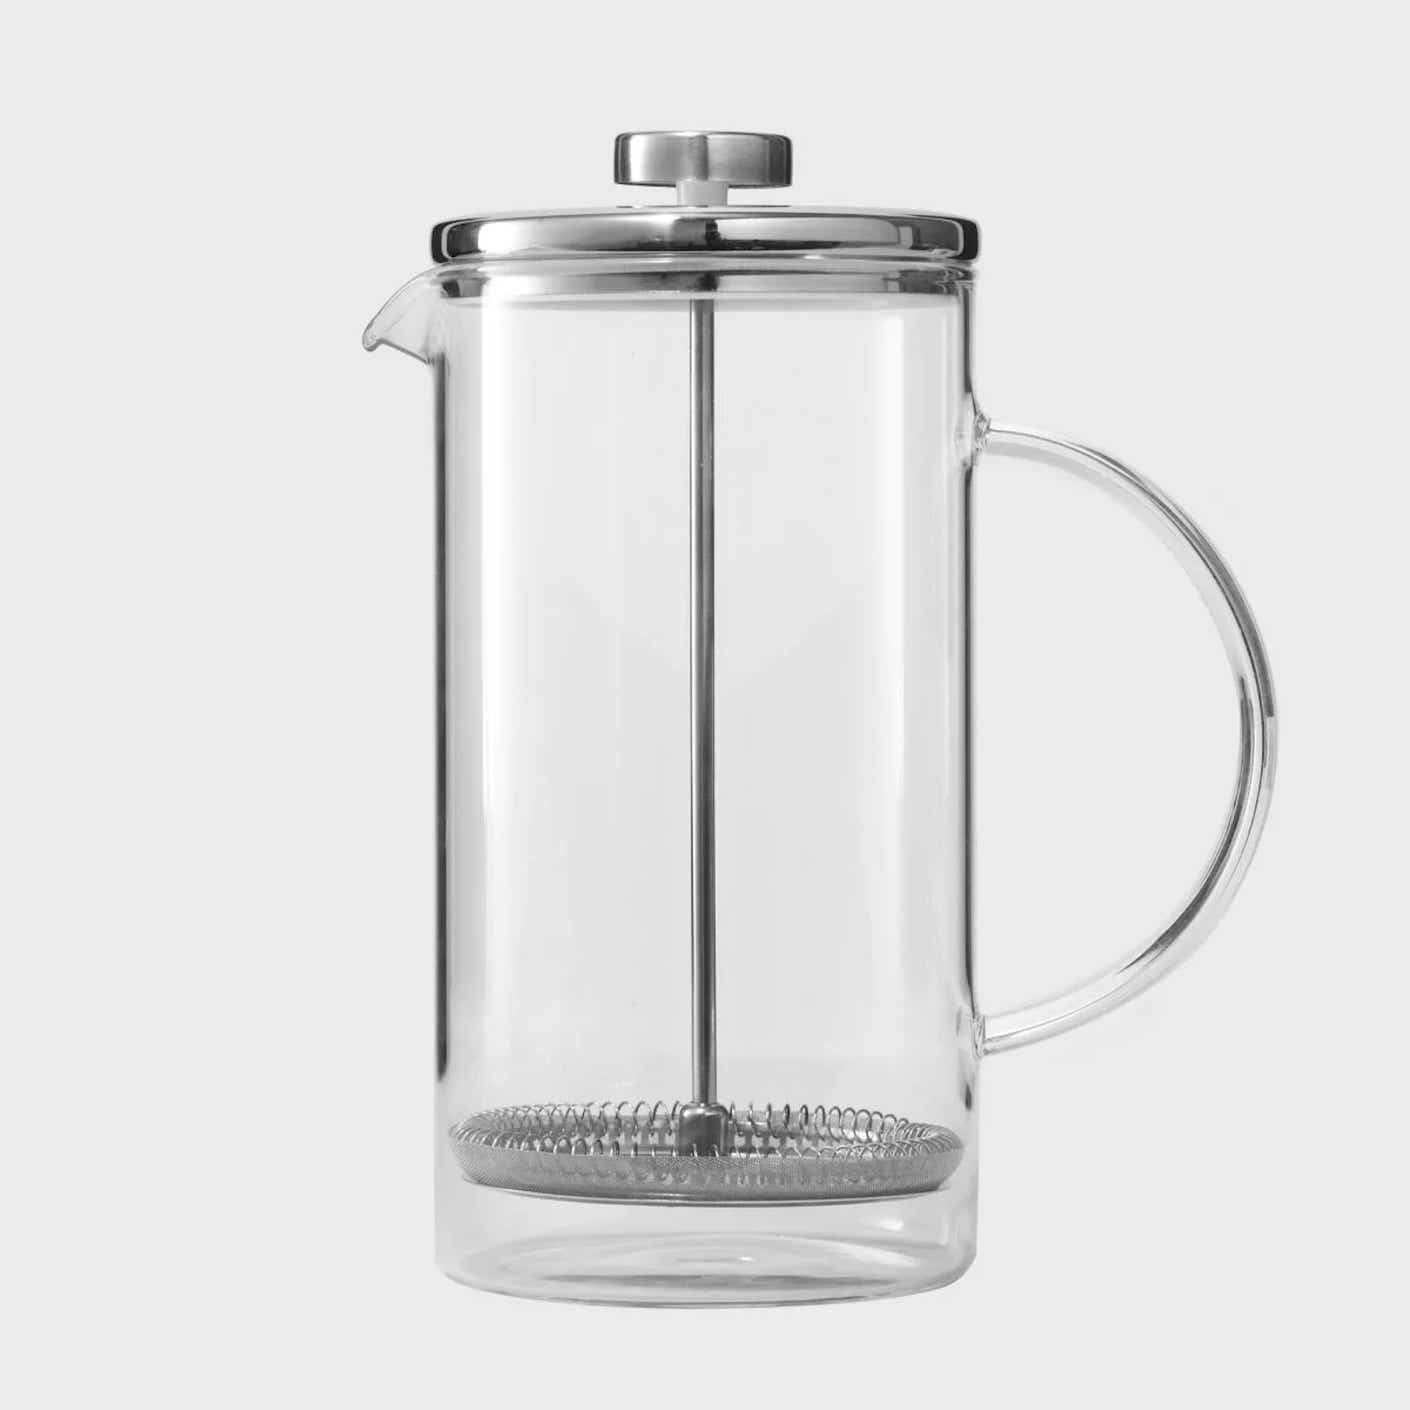 A clear glass French press with a clear handle and a metal lid and strainer is shown in front of a white background.